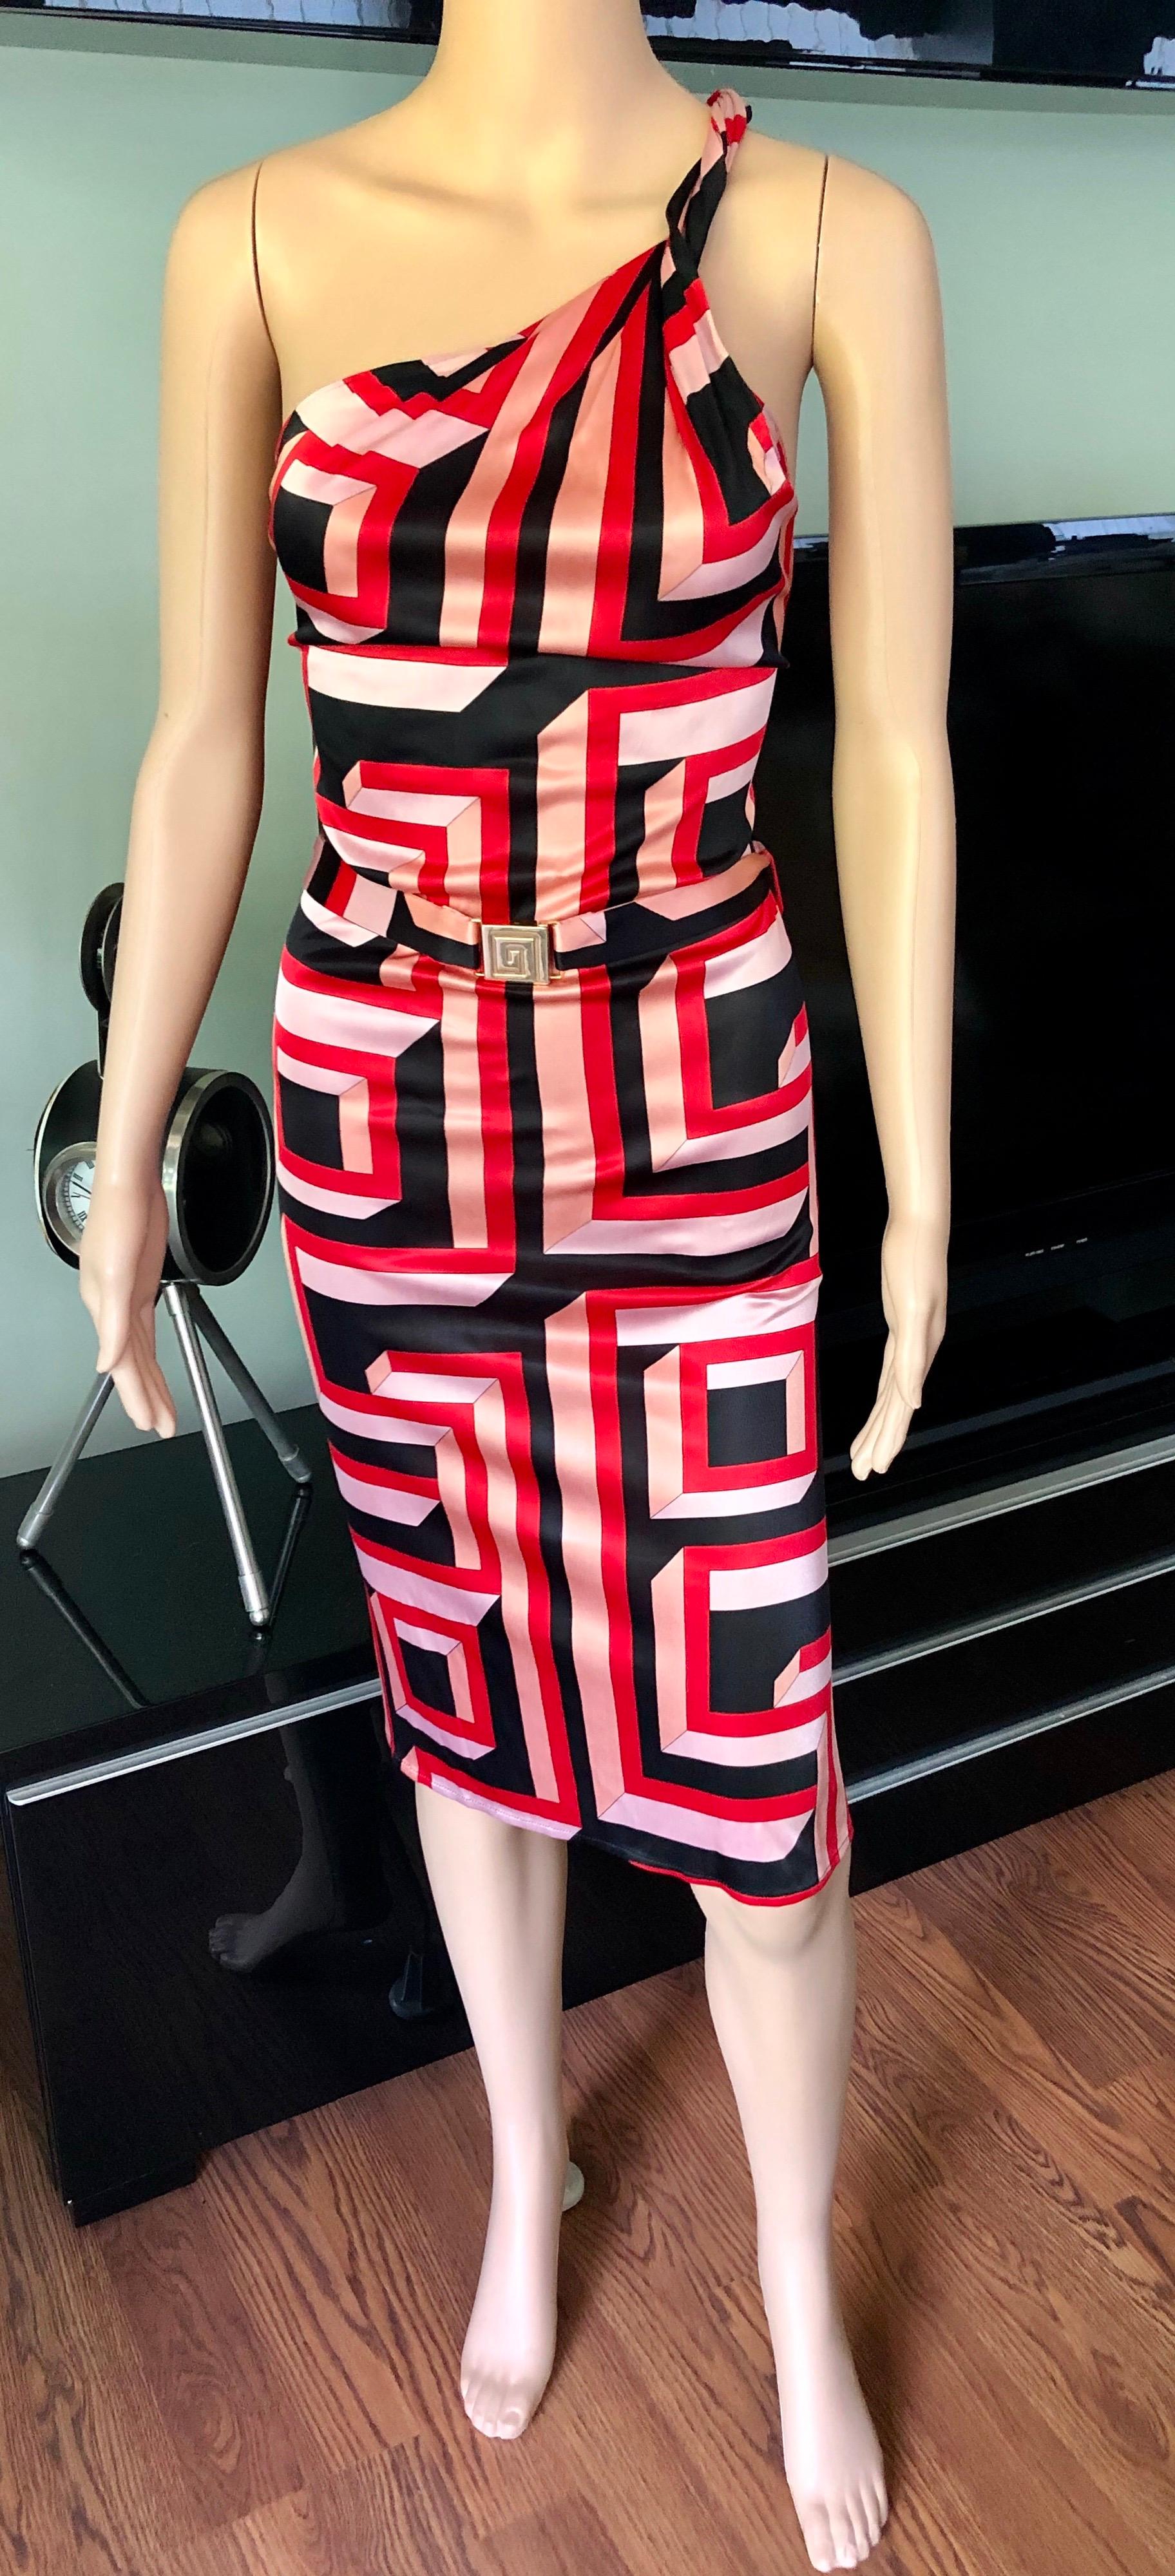 Gianni Versace S/S 2001 Vintage Geometric Print Belted Open Back Dress In Good Condition For Sale In Naples, FL